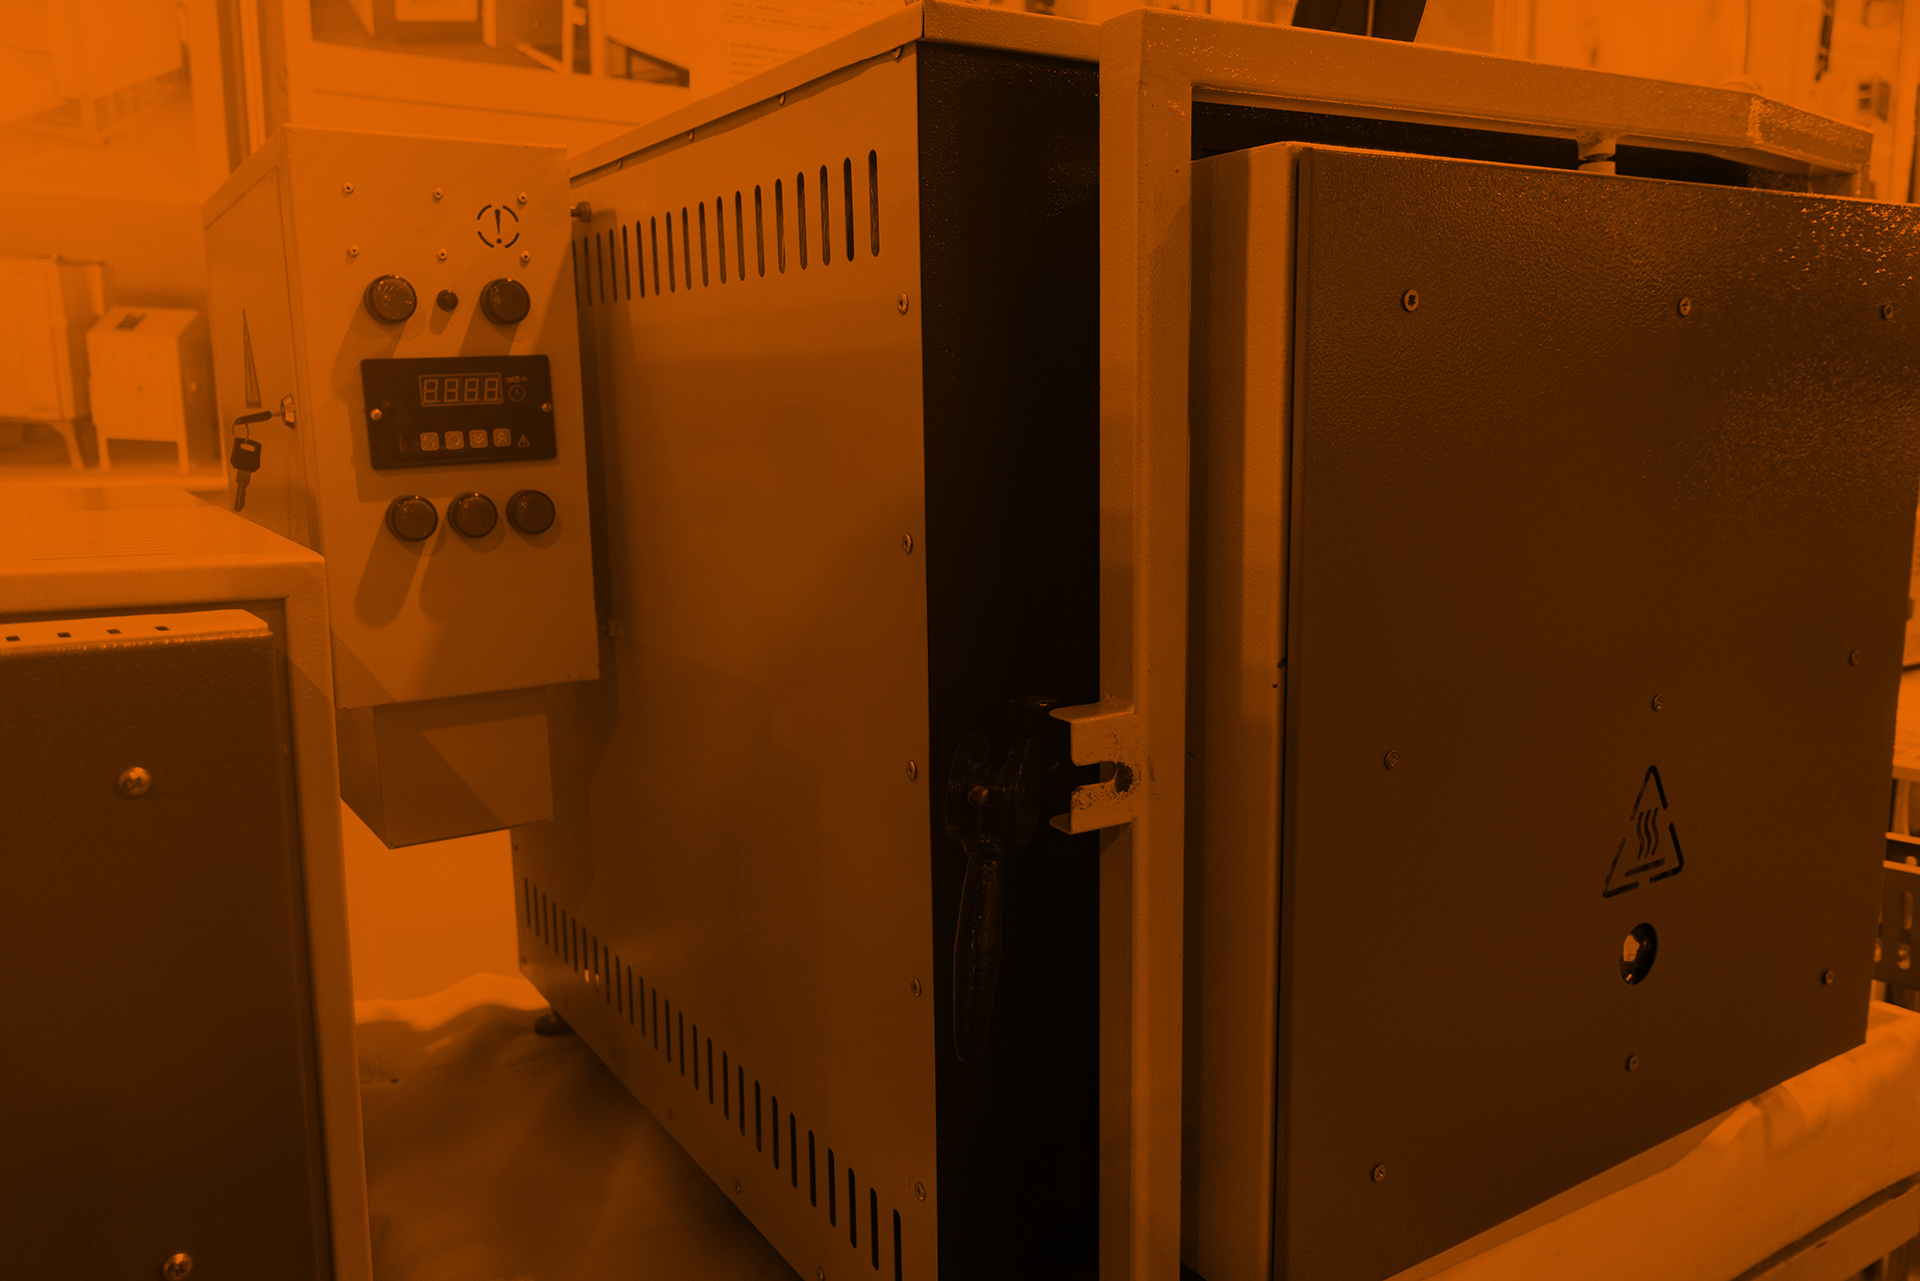 What Are Continuous Process Ovens? – JPW Industrial Ovens & Furnaces